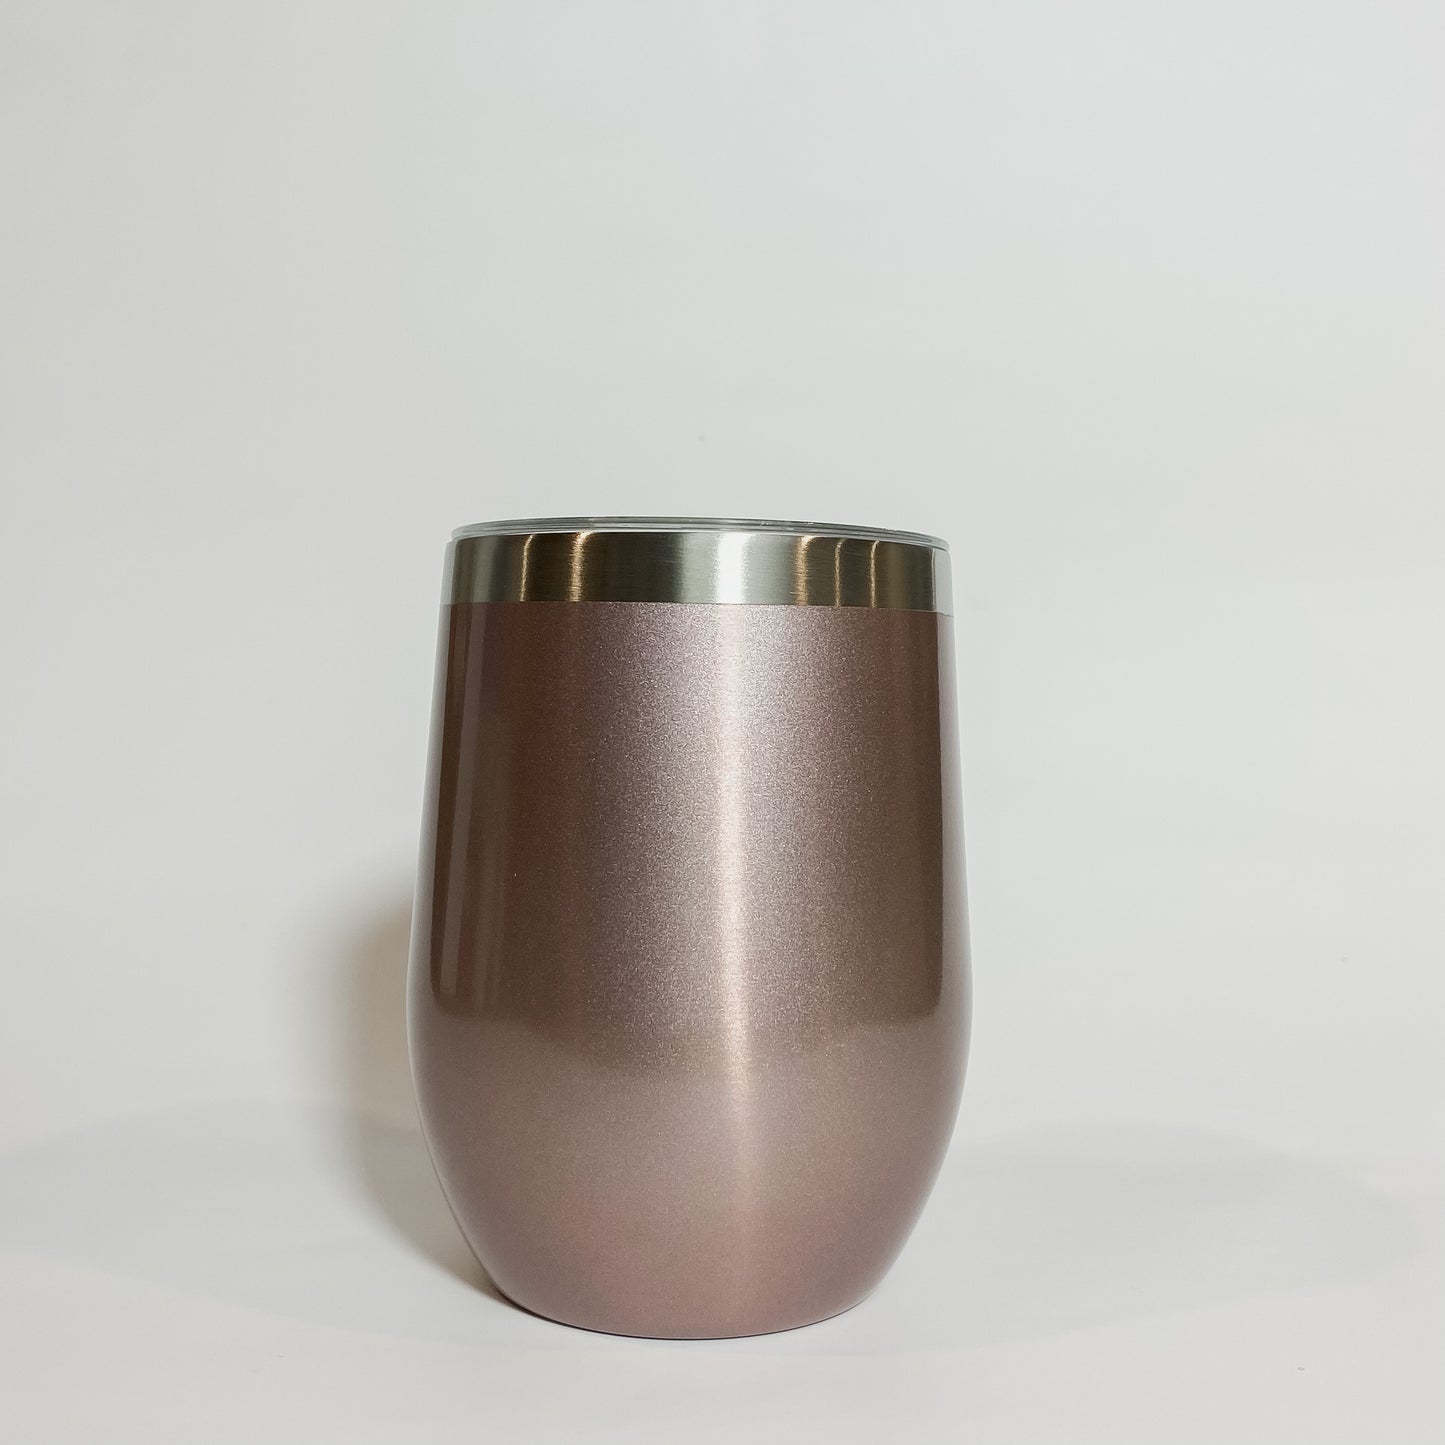 11 oz. Wine tumbler in Rose Gold, Perfect for Bridesmaid Souvenir,Wholesale Blank Tumblers Canada